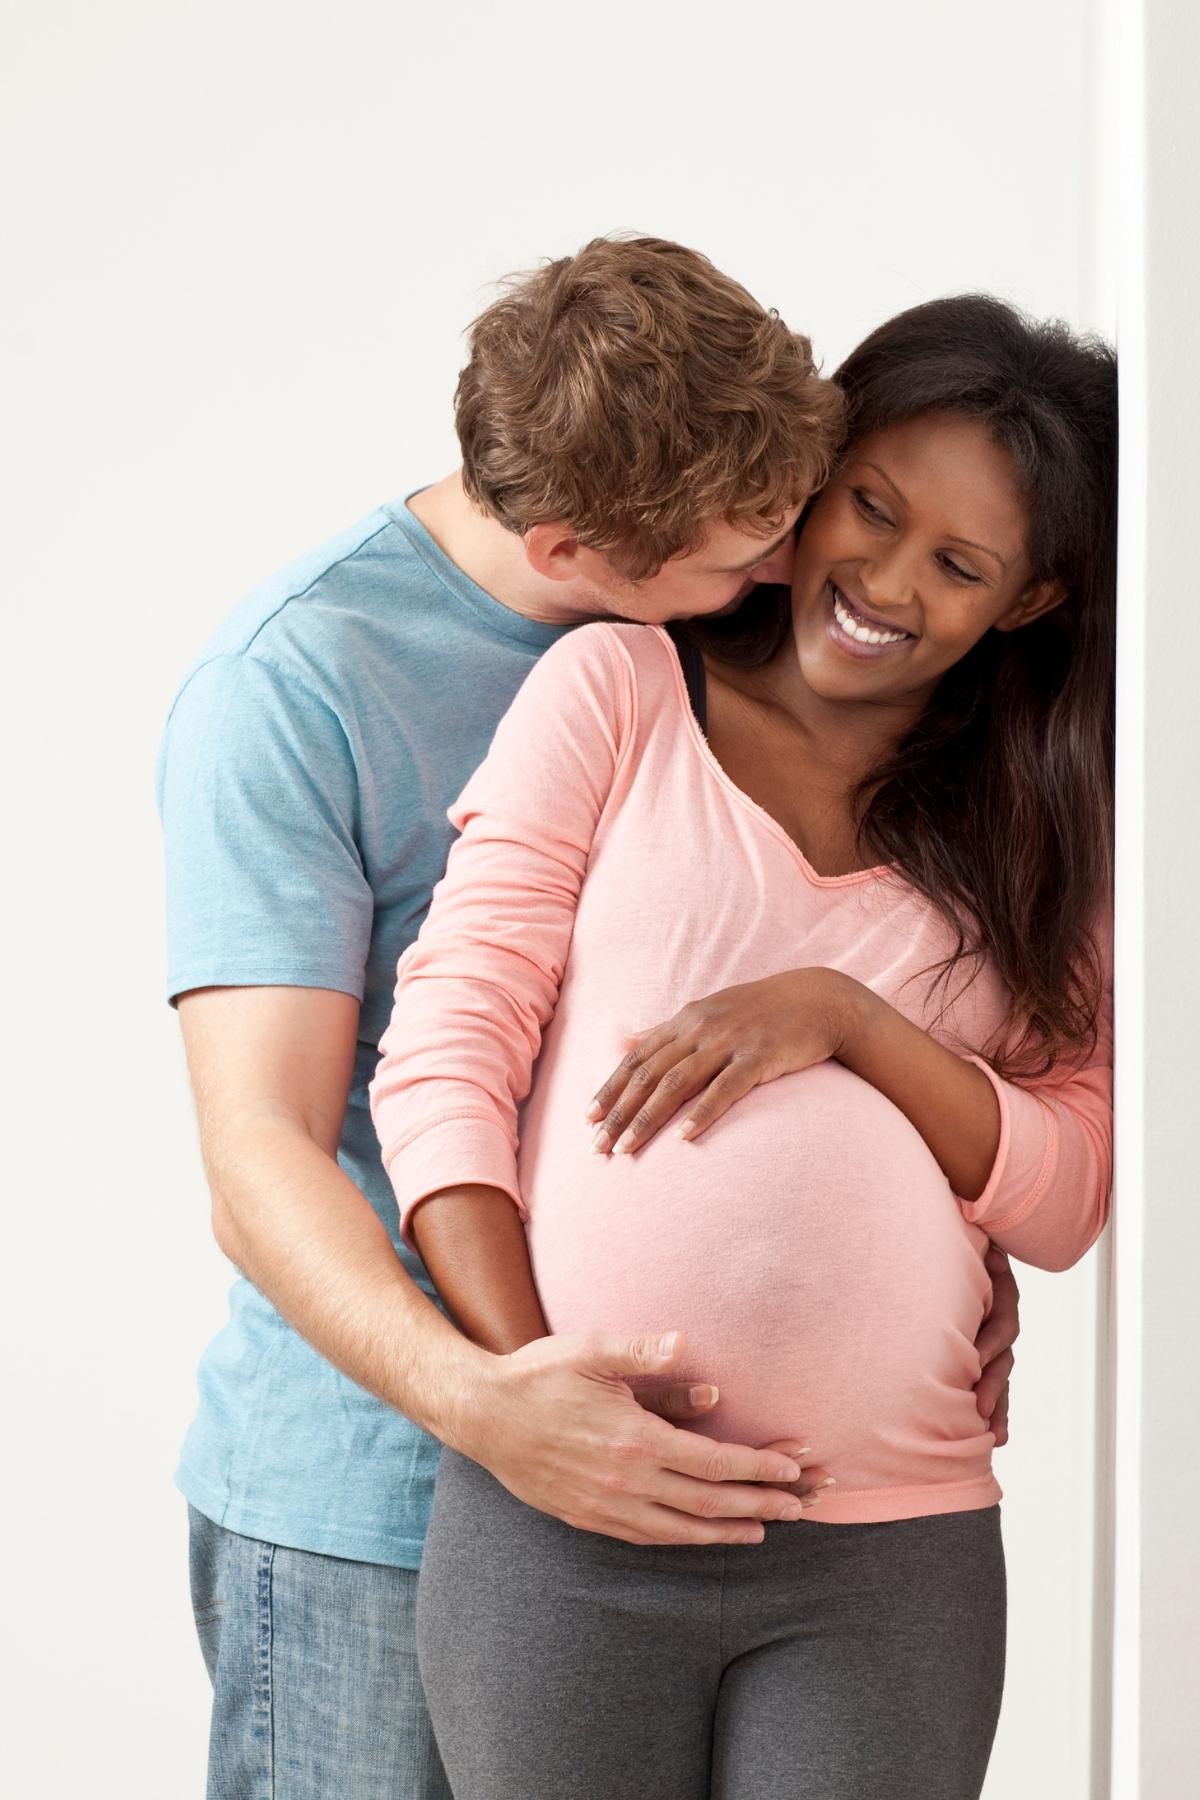 pregnant woman in a pink top and a man in a blue tshirt hugging her from behind.